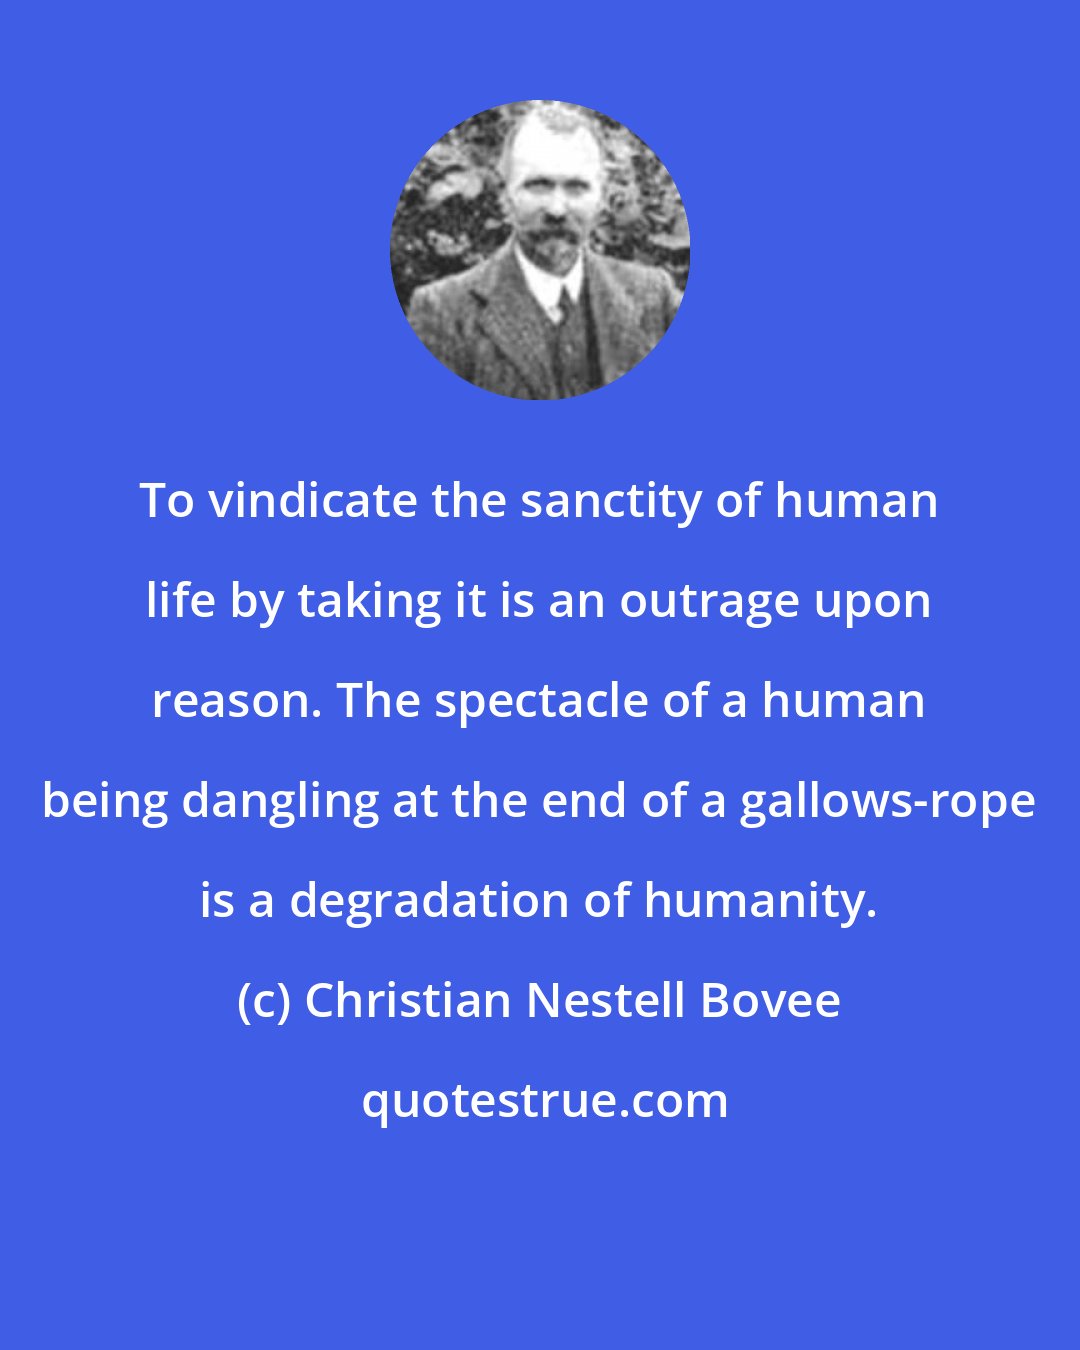 Christian Nestell Bovee: To vindicate the sanctity of human life by taking it is an outrage upon reason. The spectacle of a human being dangling at the end of a gallows-rope is a degradation of humanity.